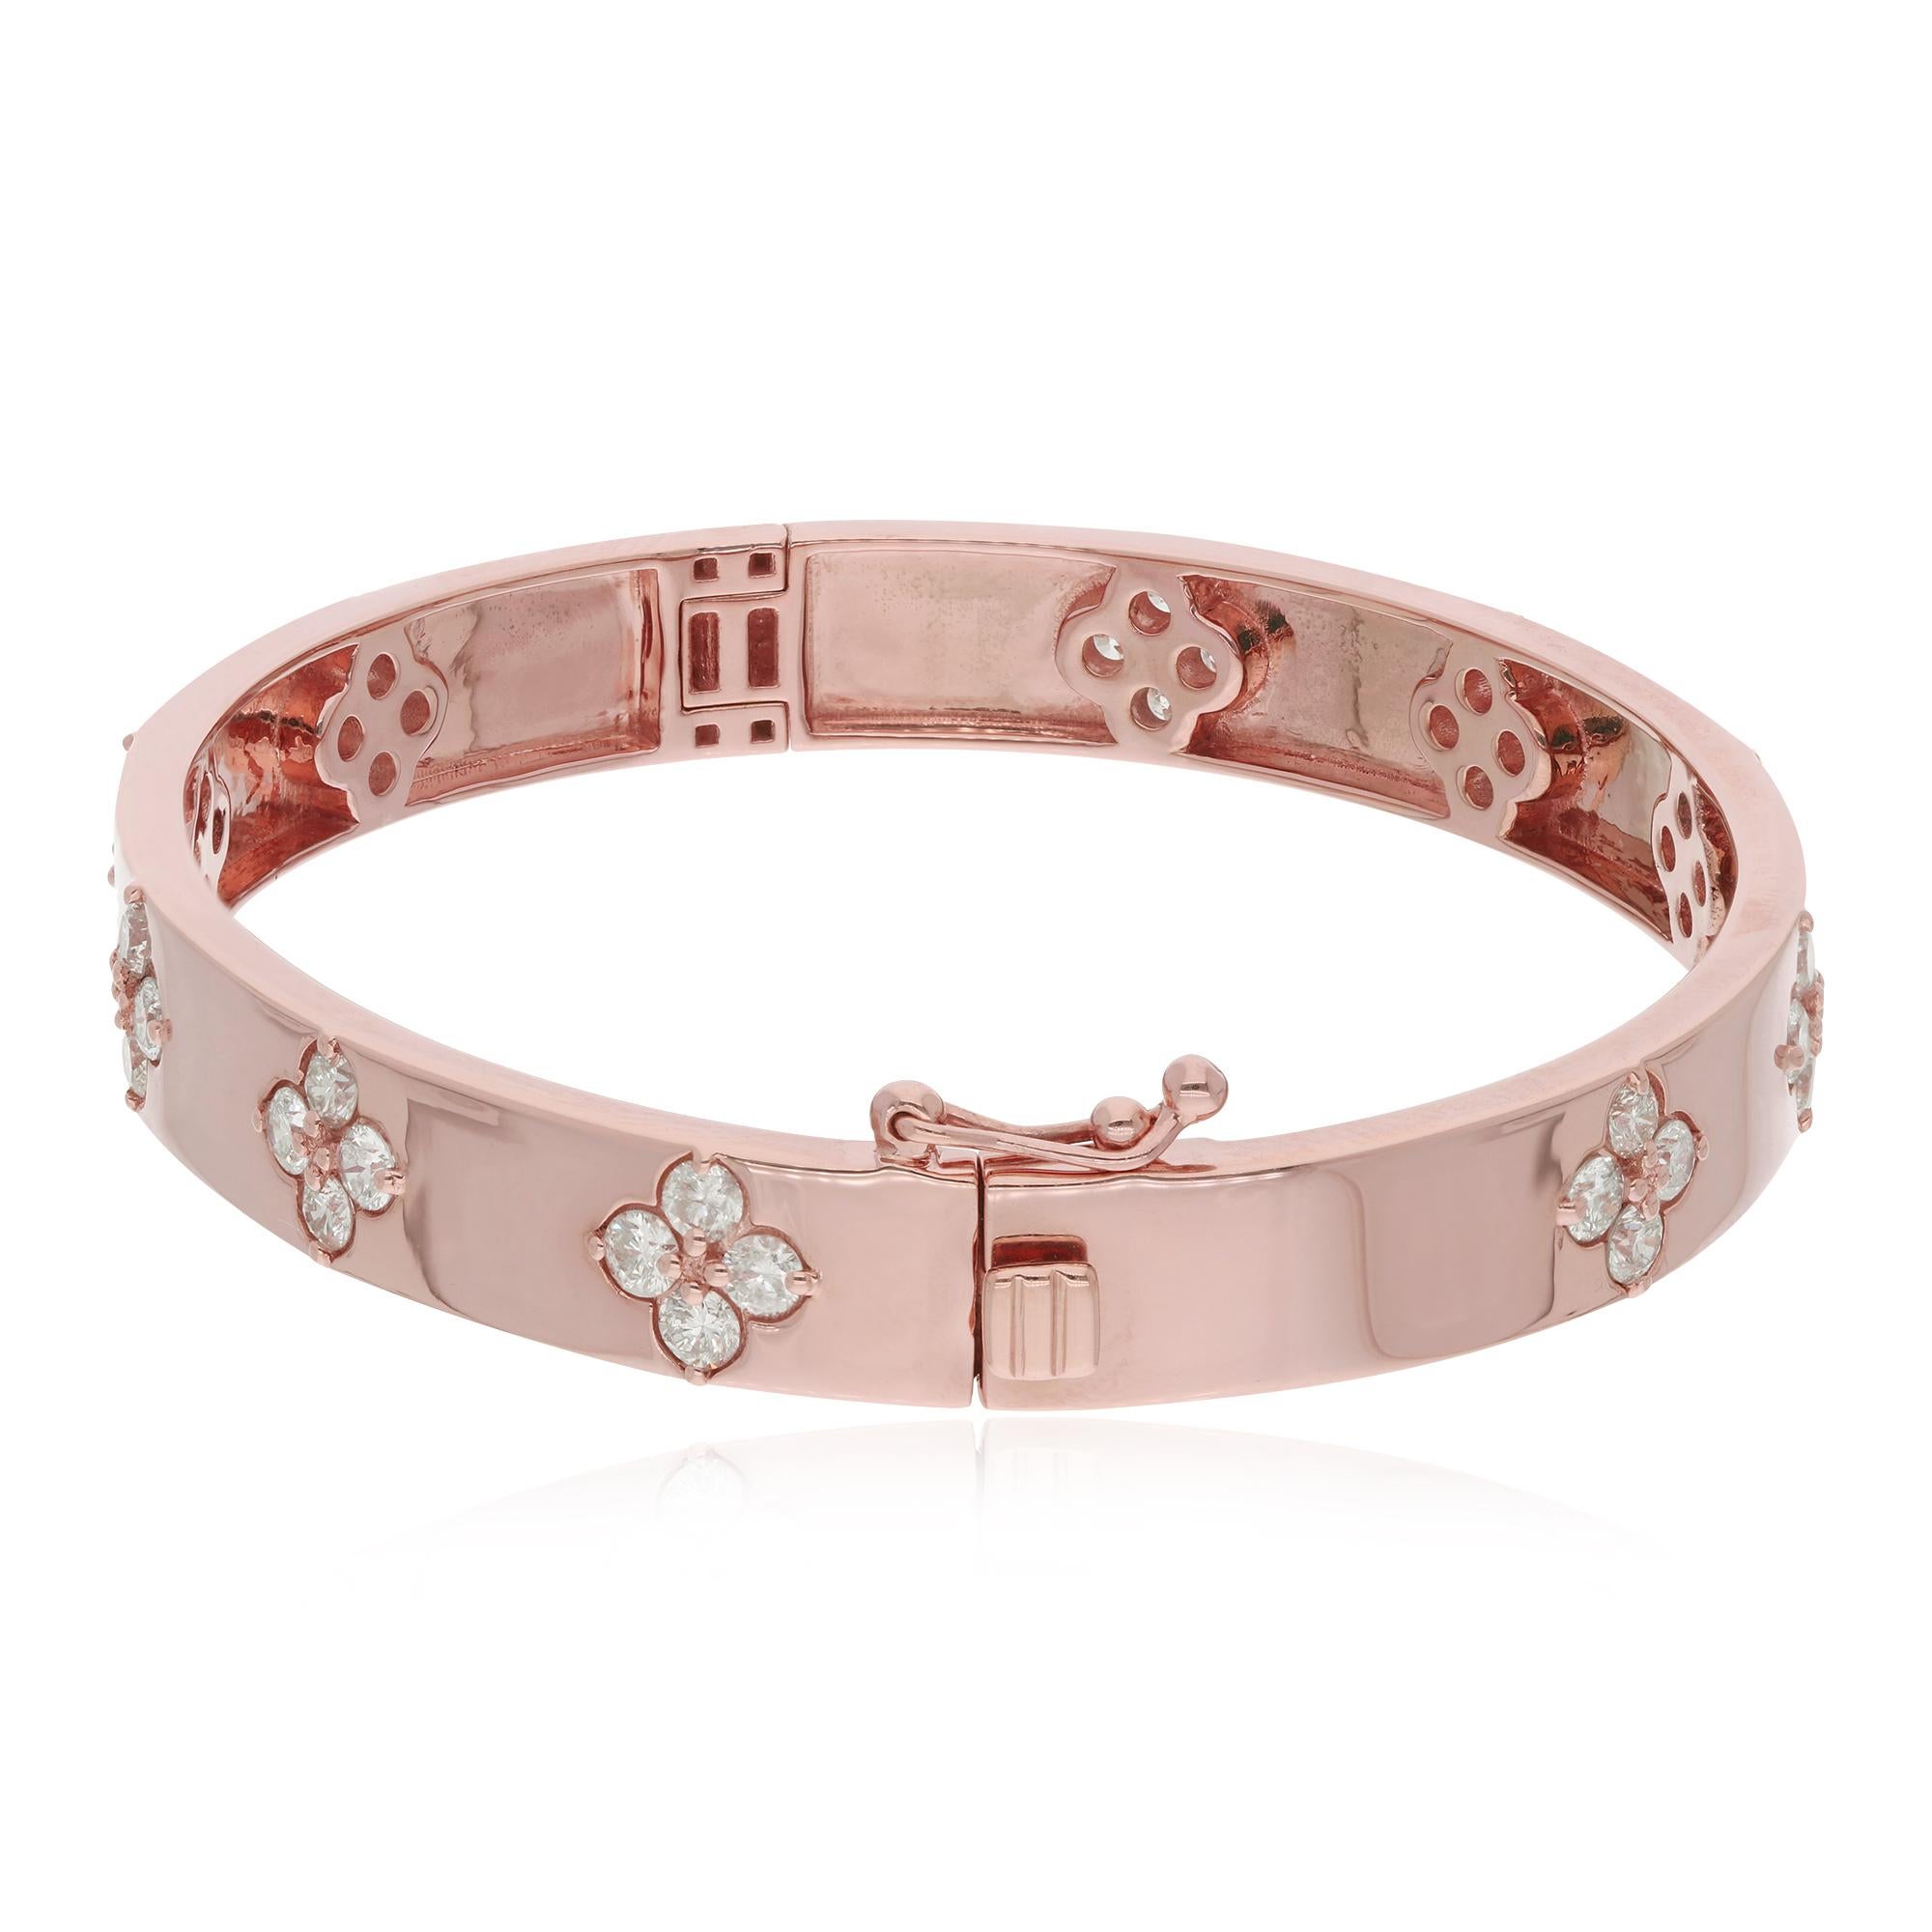 The bangle bracelet design features a circular shape that is meant to be slipped onto the wrist and worn as a standalone piece or stacked with other bracelets. The size and thickness of the bangle can vary based on personal preference.

Item Code :-